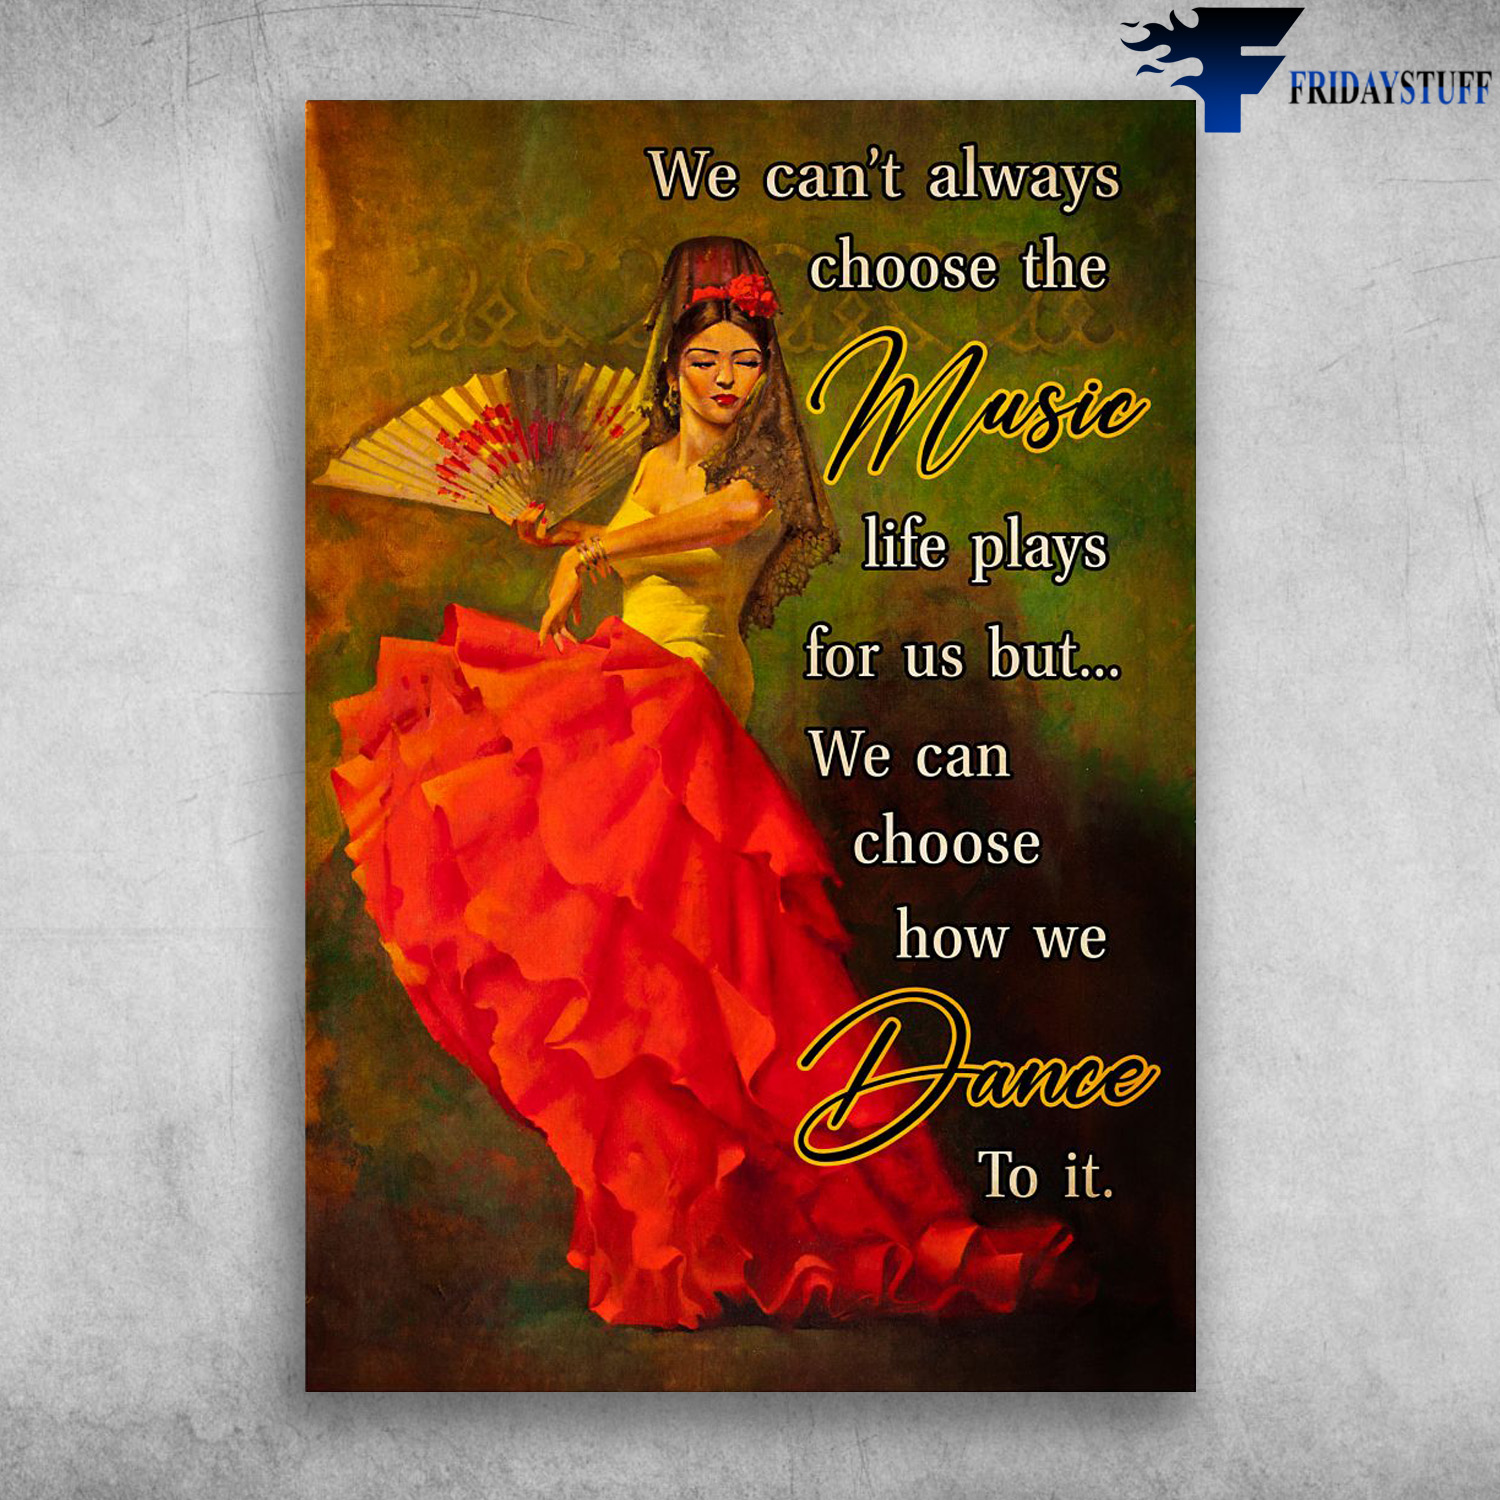 Dancing Girl - We Can't Always Choose, The Music Life Plays For Us But, We Can Choose How We Dance To It